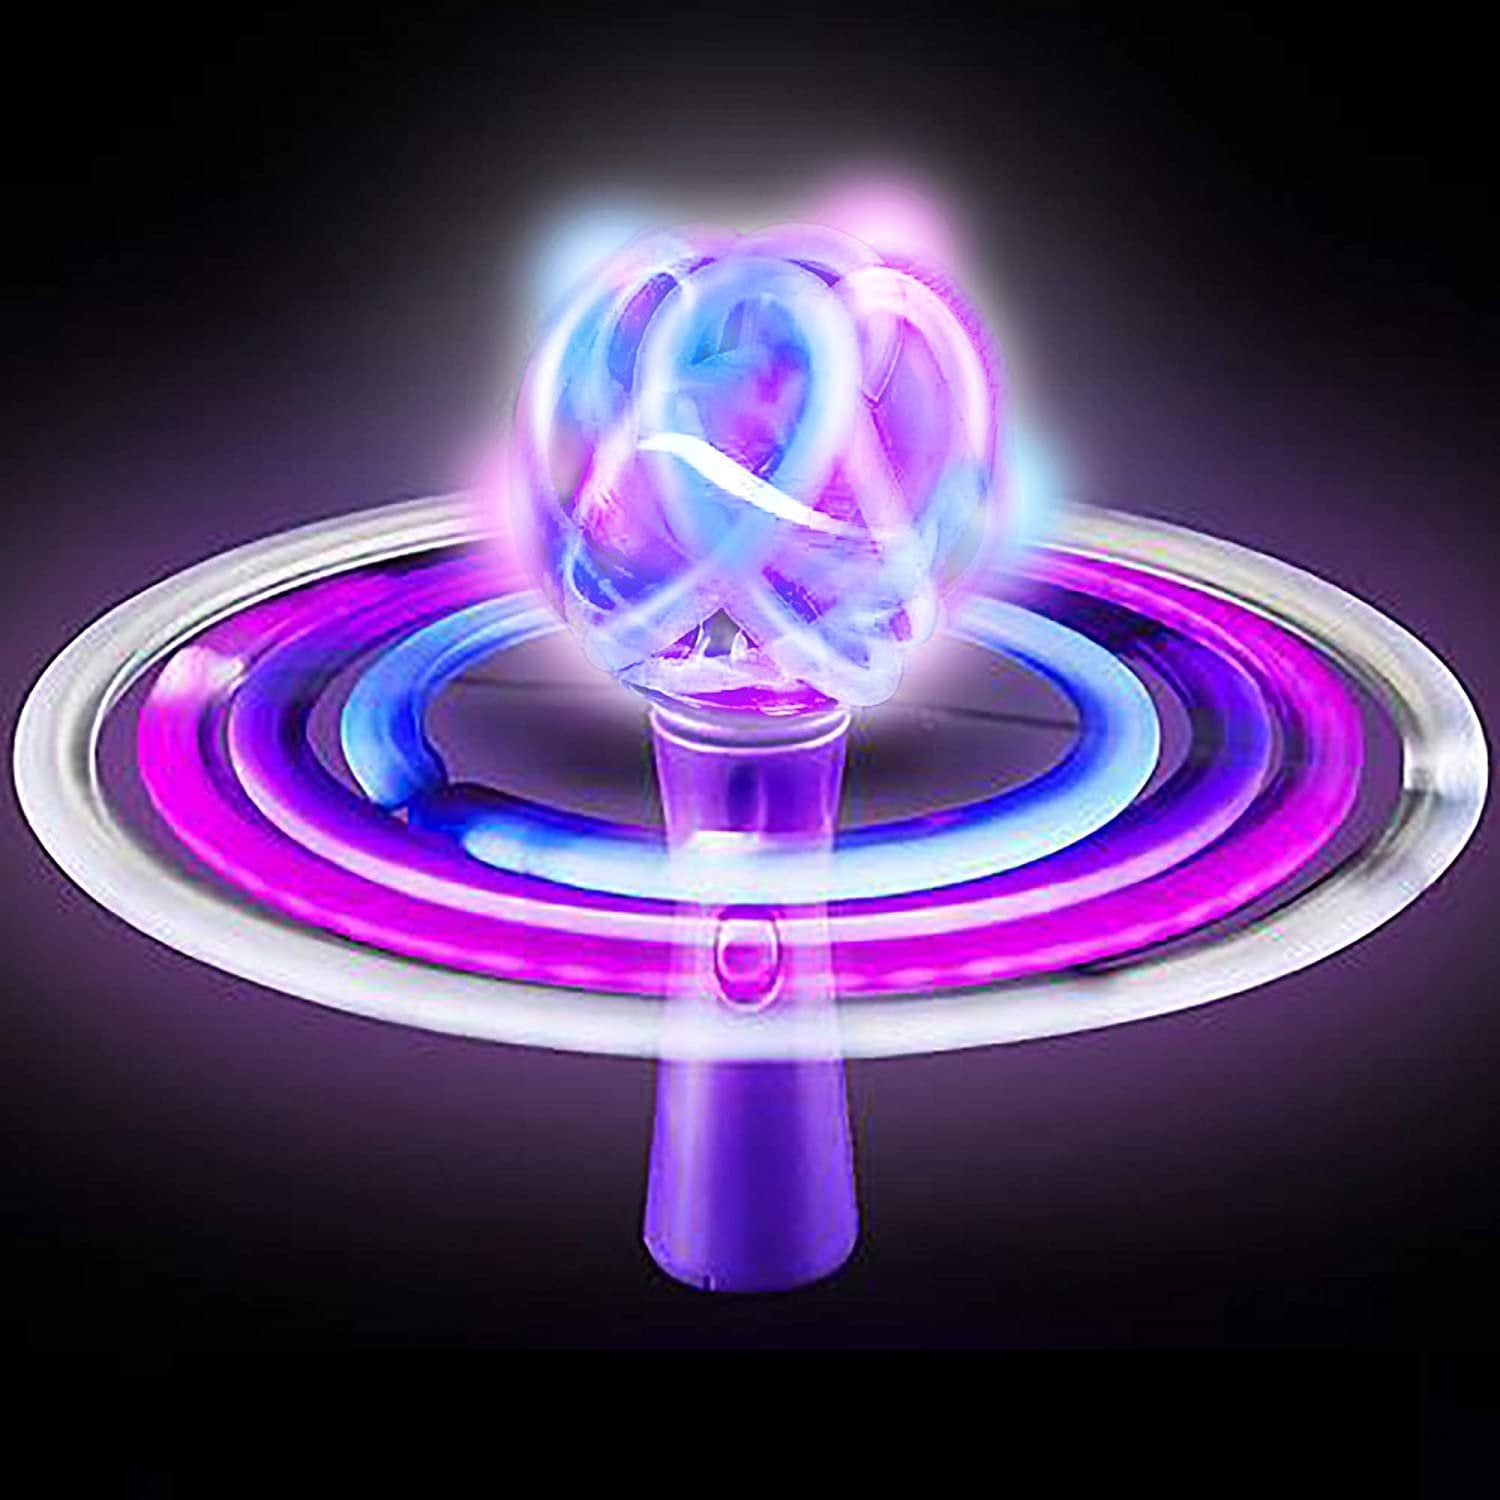 Light Up Galaxy Orbiter Wand - 9" LED Electronic Spin Toy for Kids with Batteries Included - Great Gift Idea for Boys, Girls, Toddlers - Fun Birthday Party Favor, Carnival Prize